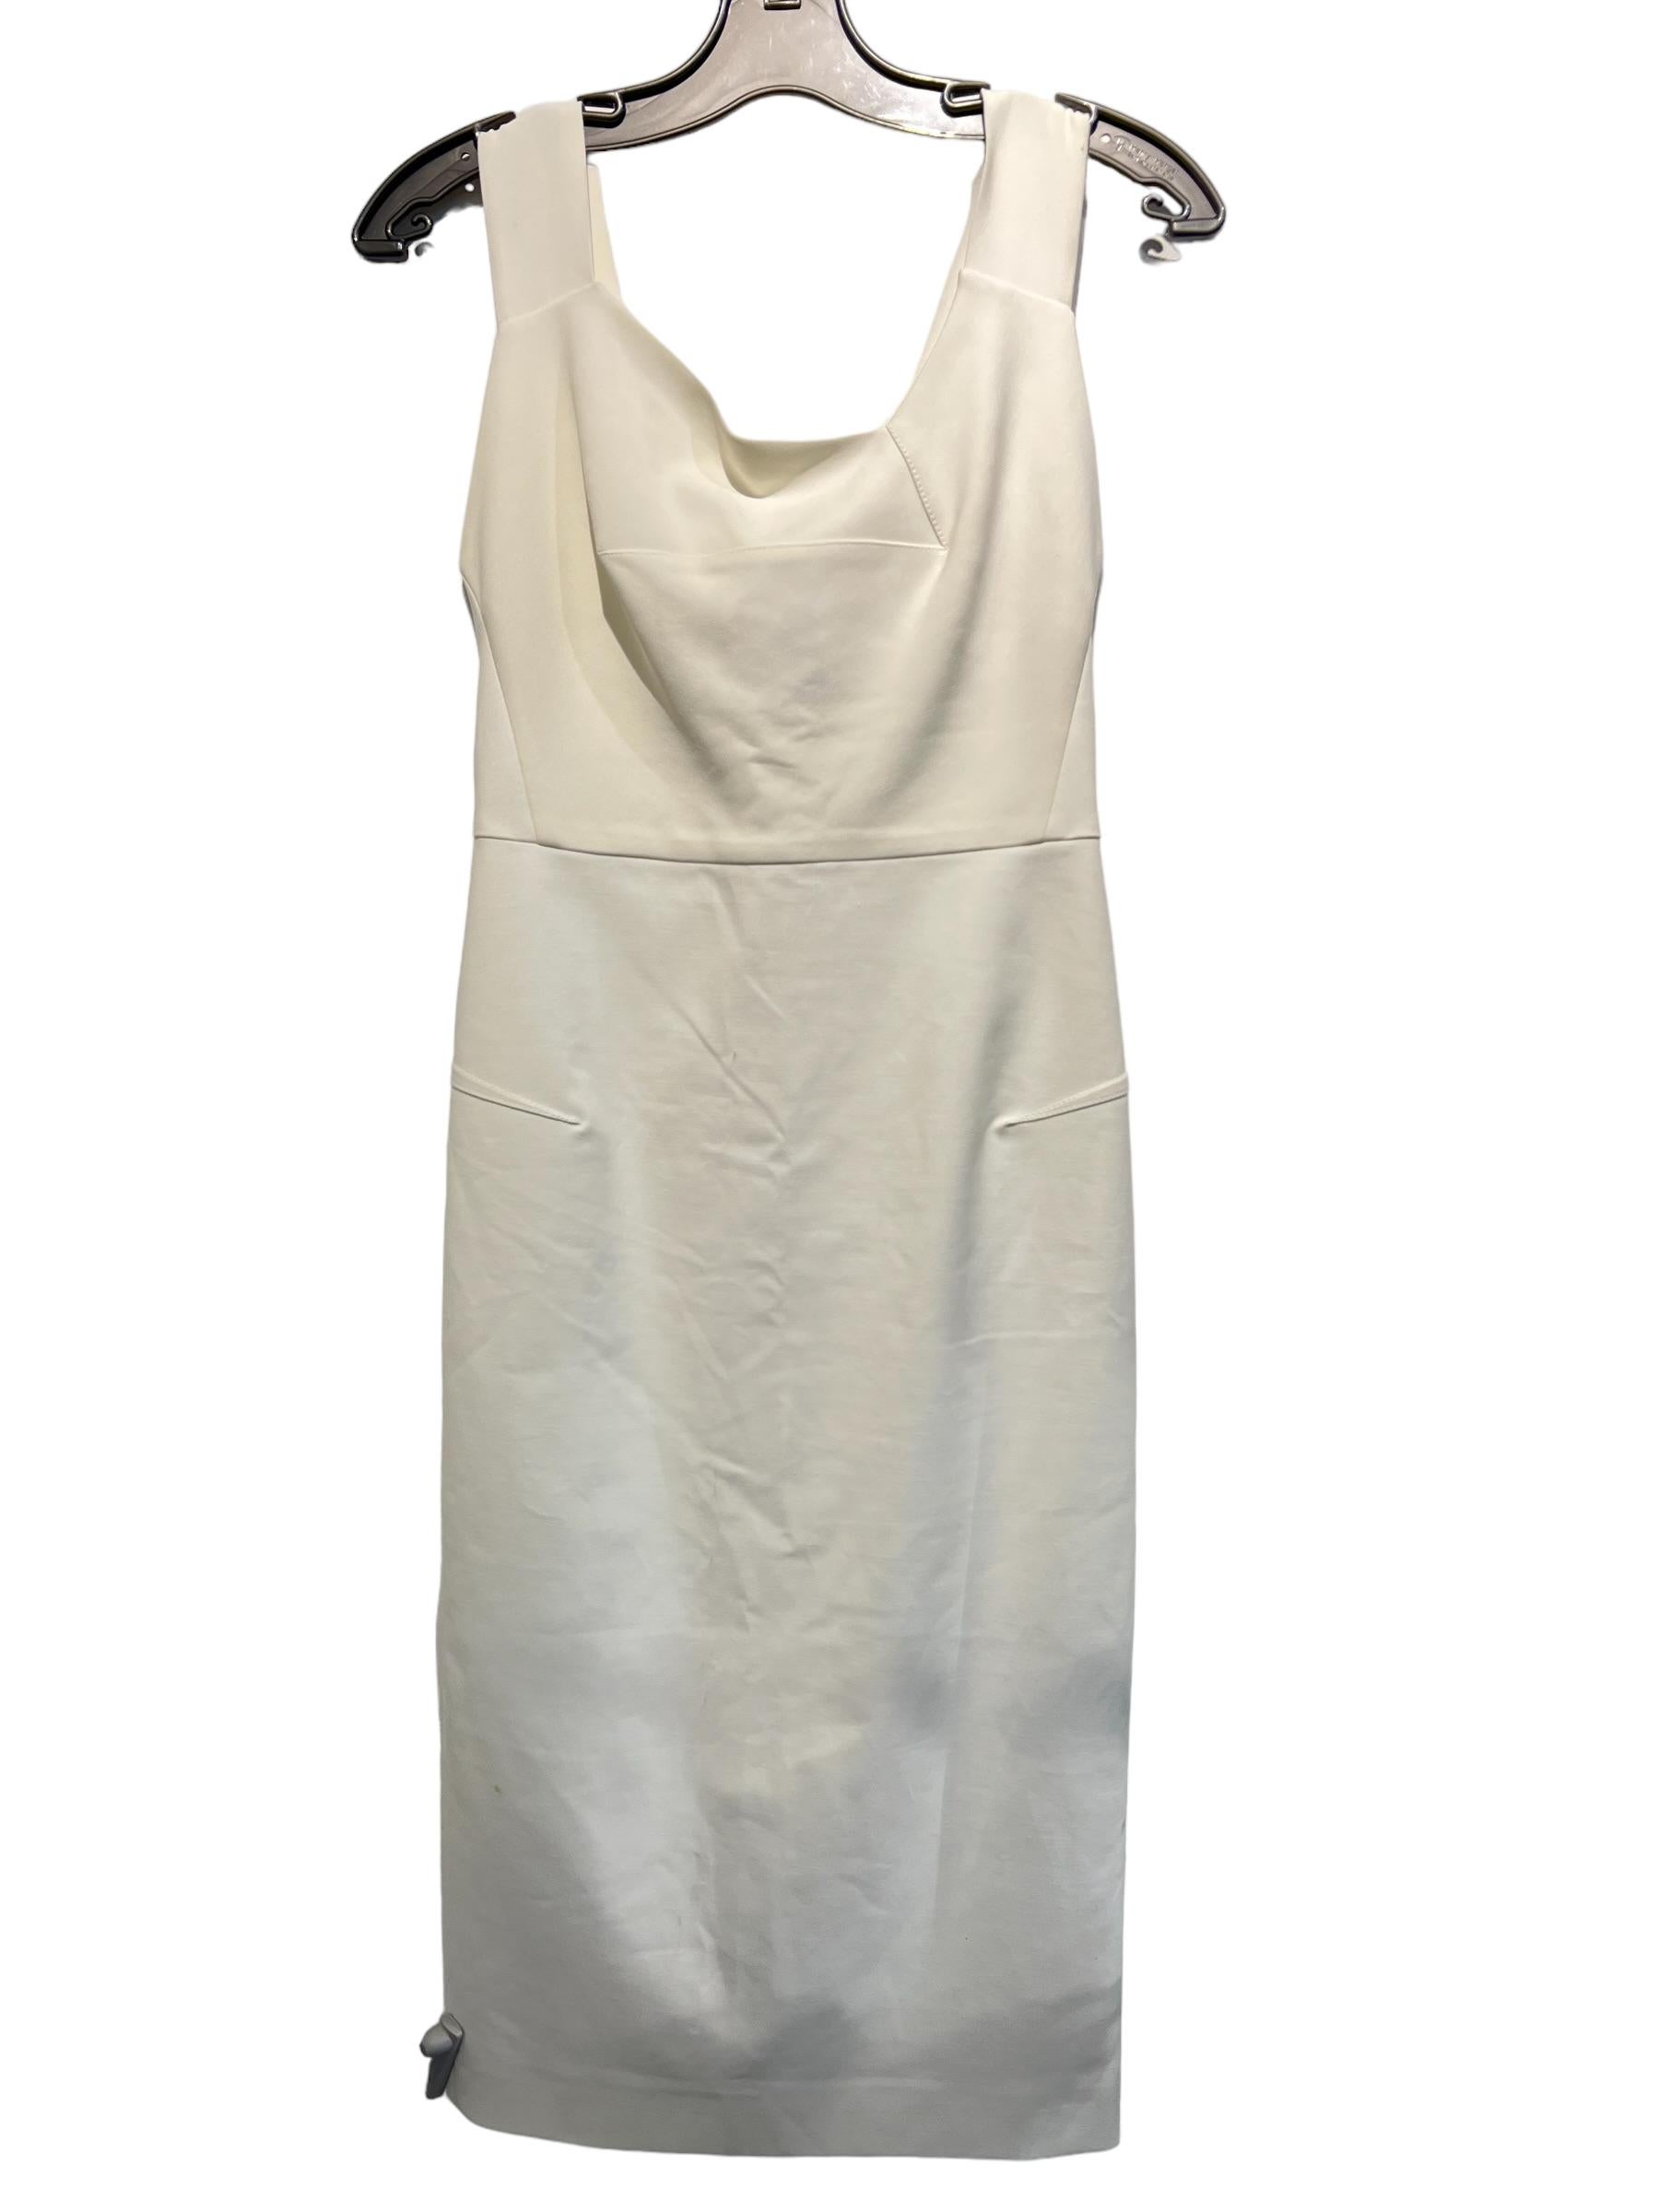 Roland Mouret Off White Dress fitted Shoulder Straps, Decorative Dart by Neck, Gold Zipper in the Back and Slit